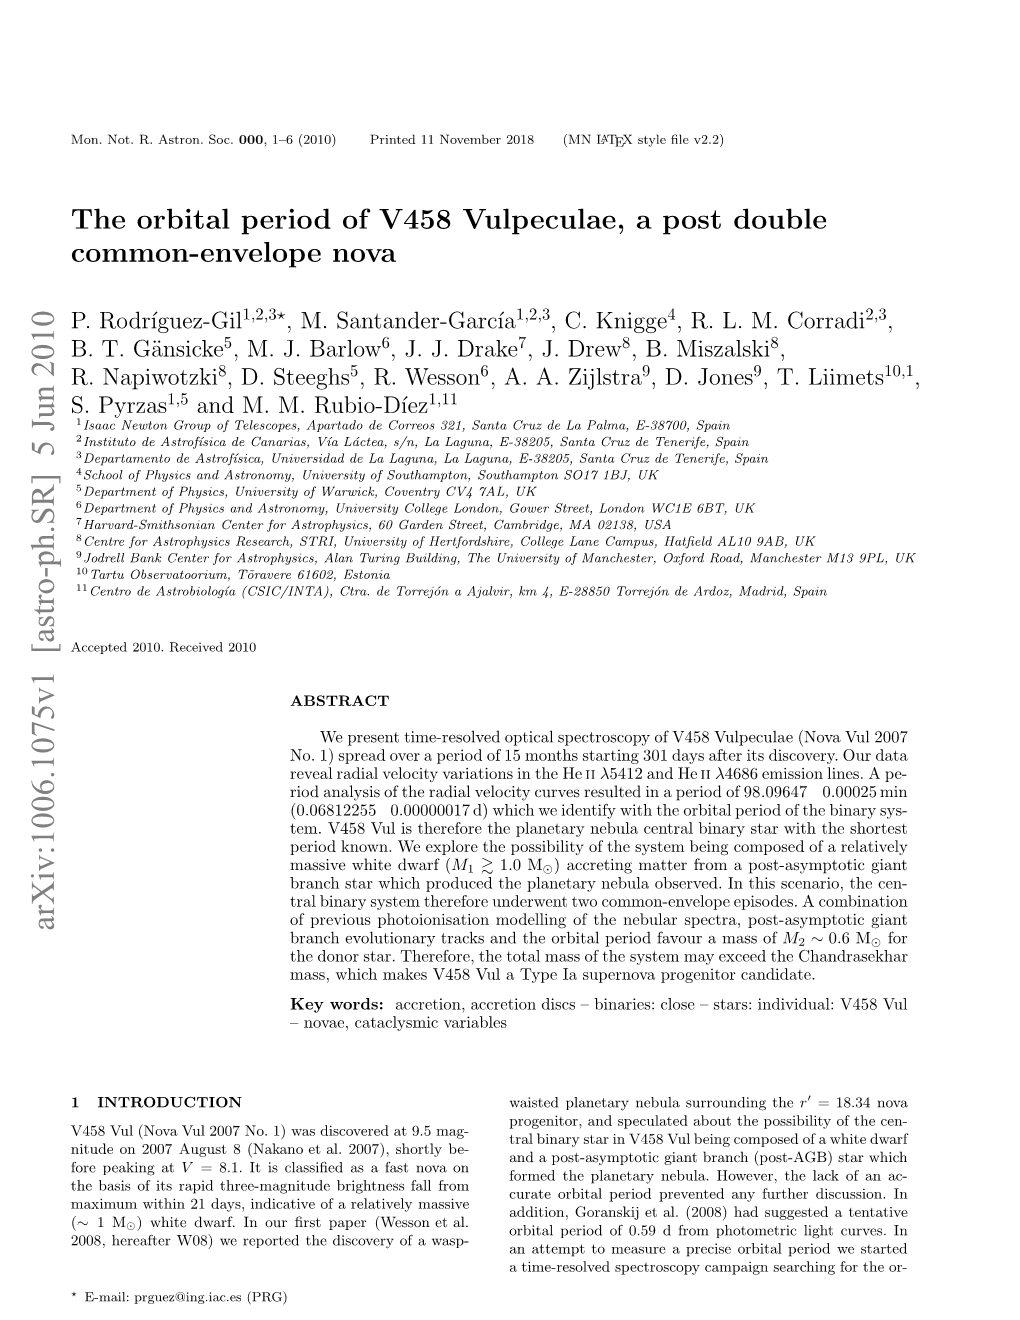 The Orbital Period of V458 Vulpeculae, a Post Double Common-Envelope Nova